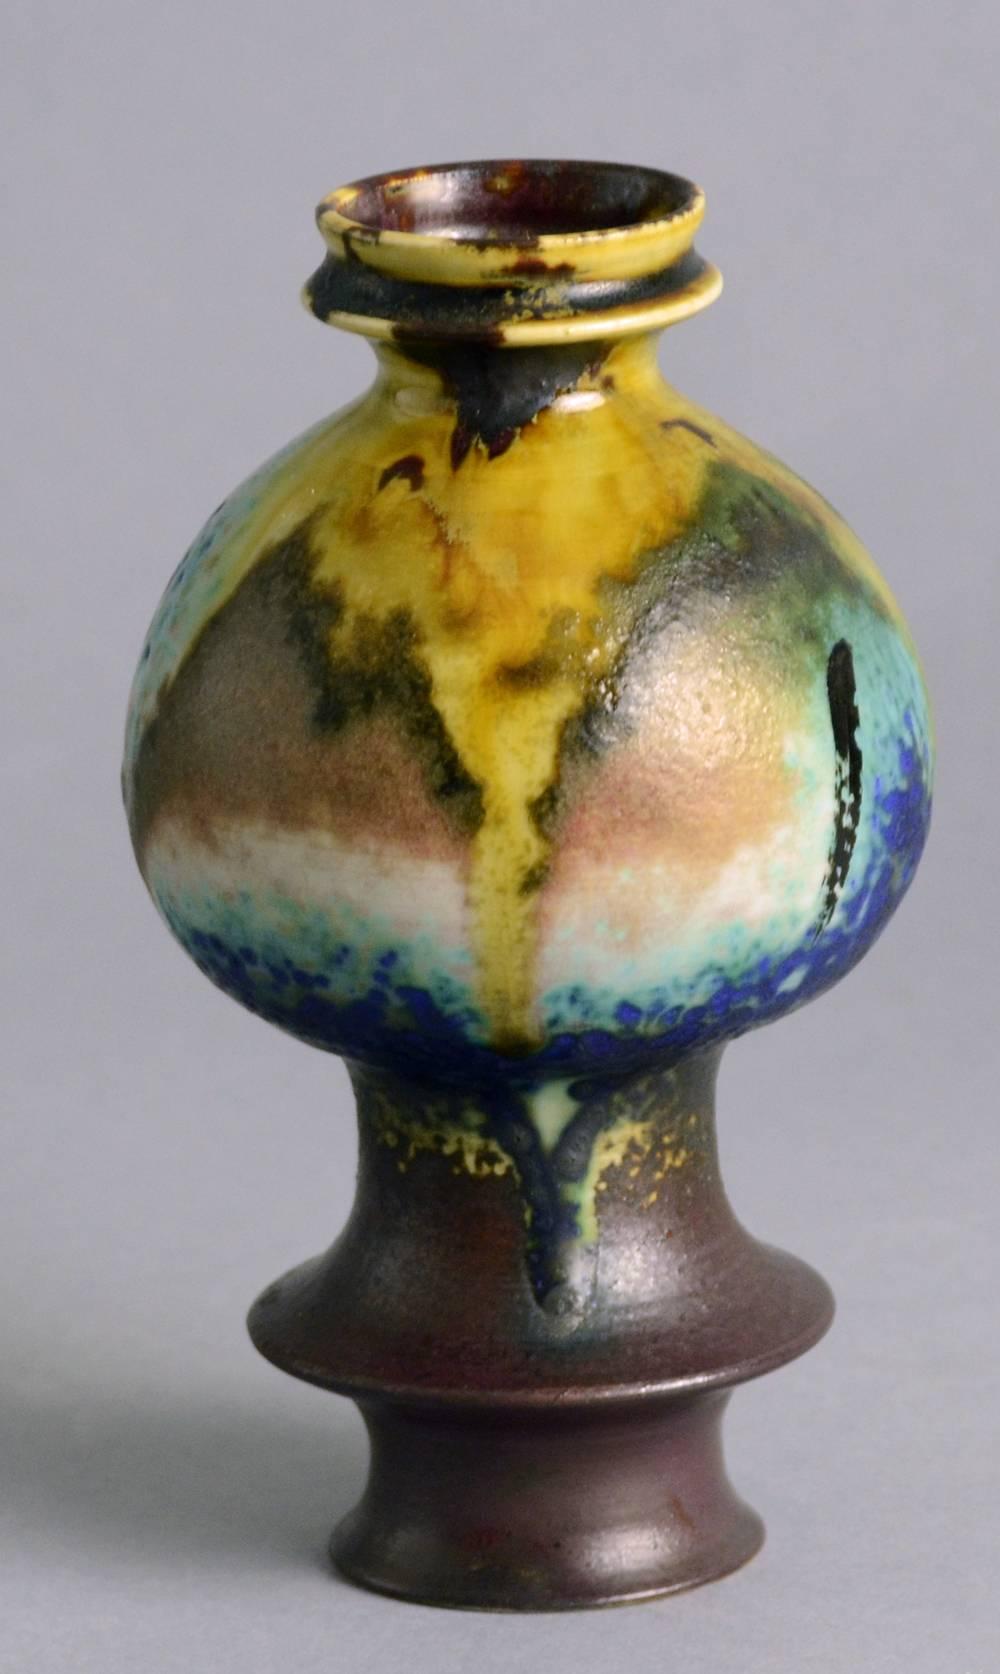 1.  Unique stoneware vase with brown, yellow and turquoise gloss and semi-matte glazes, 1950s-60s.
Height 6 1/4